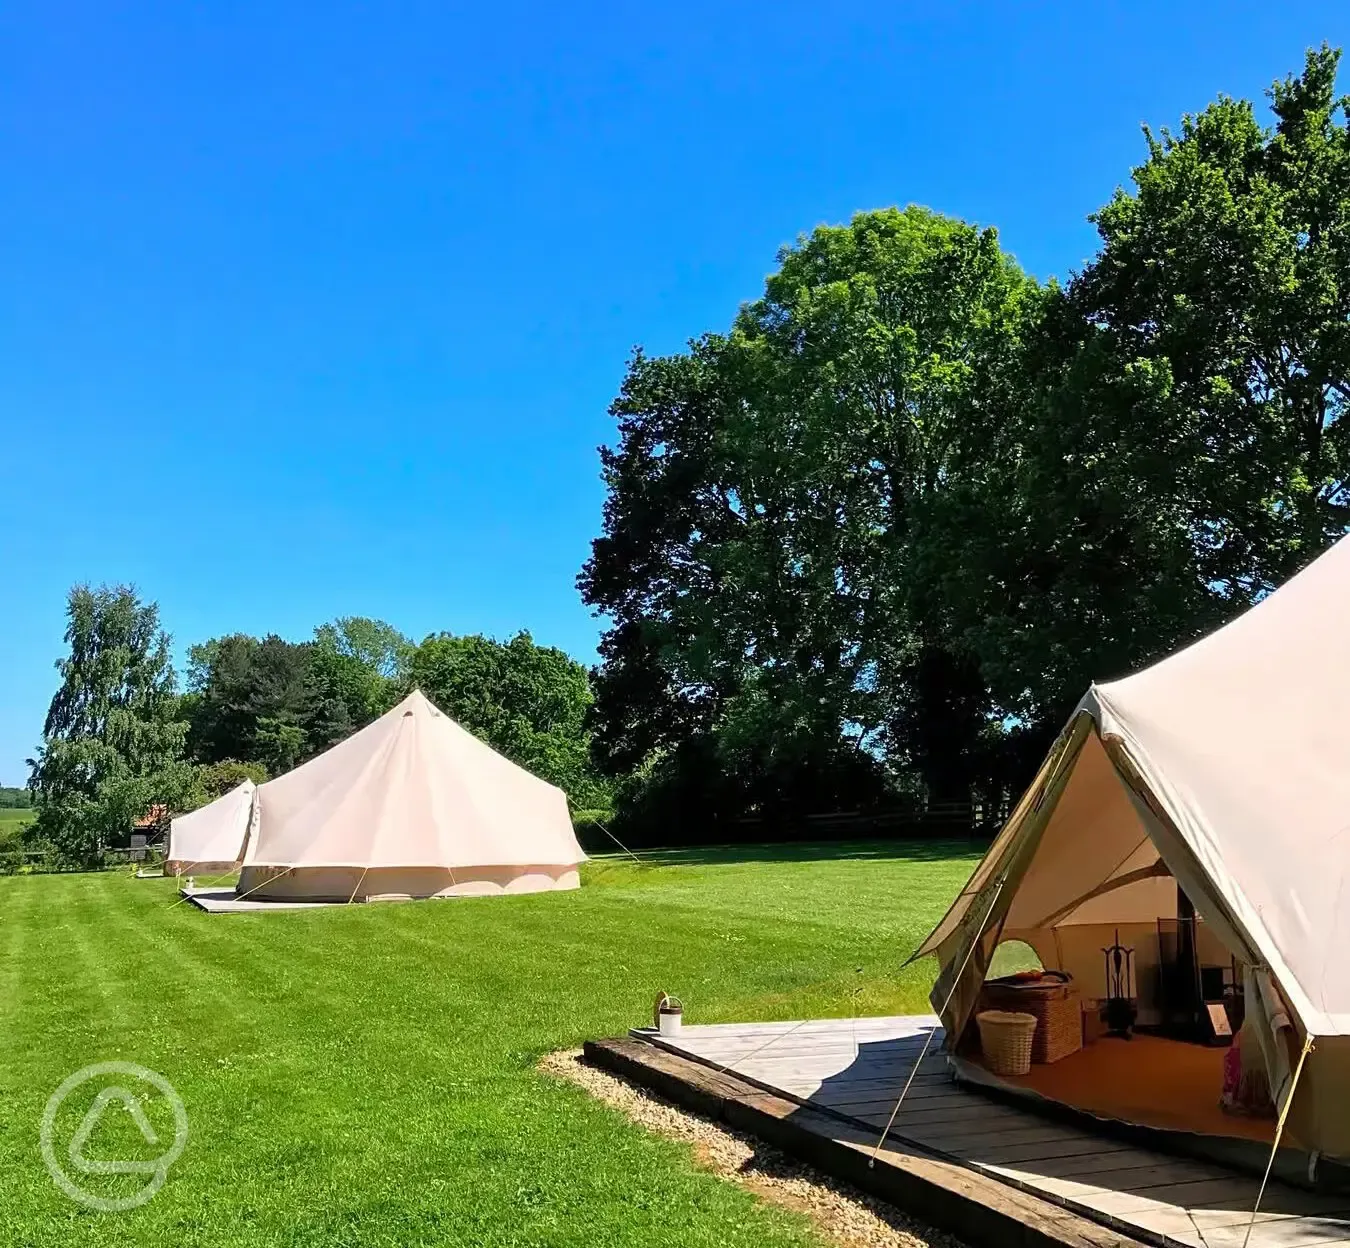 Two bell tents